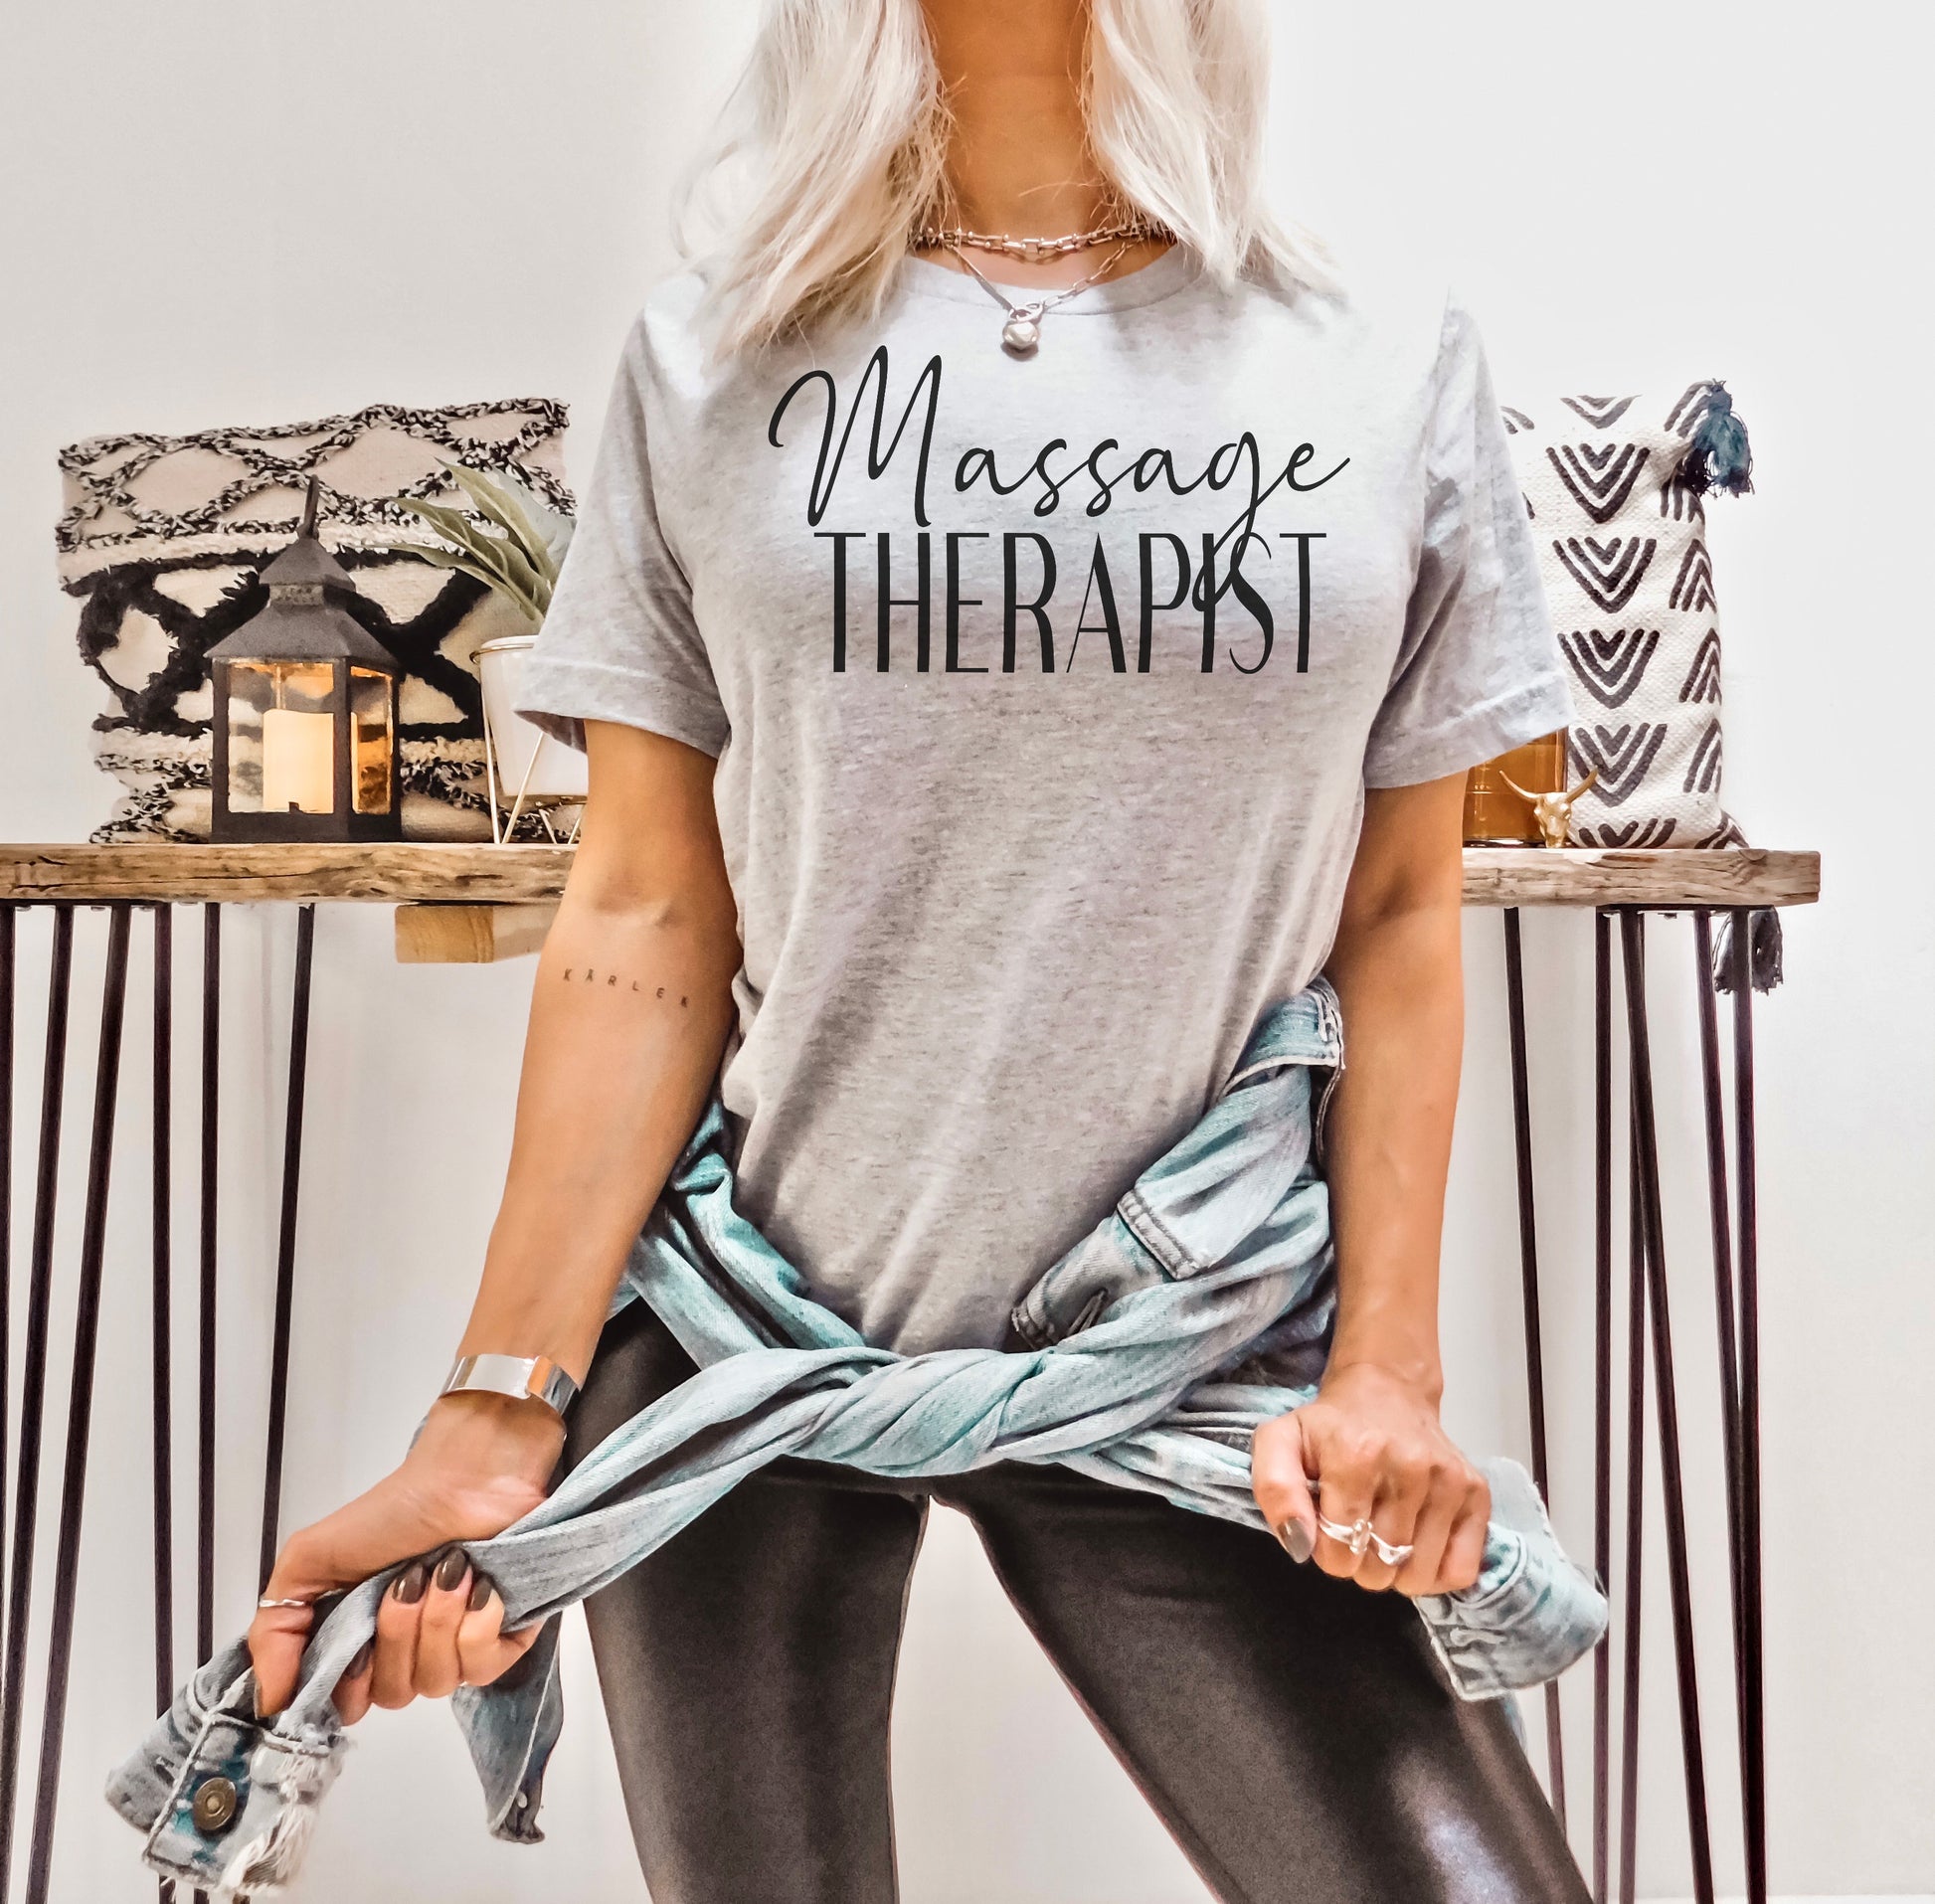 Designs by Prim Massage Therapist Soft Unisex T-Shirt | Therapy Reiki Muscle Whisperer Licensed Spa Salon Therapy Graphic Tee Top